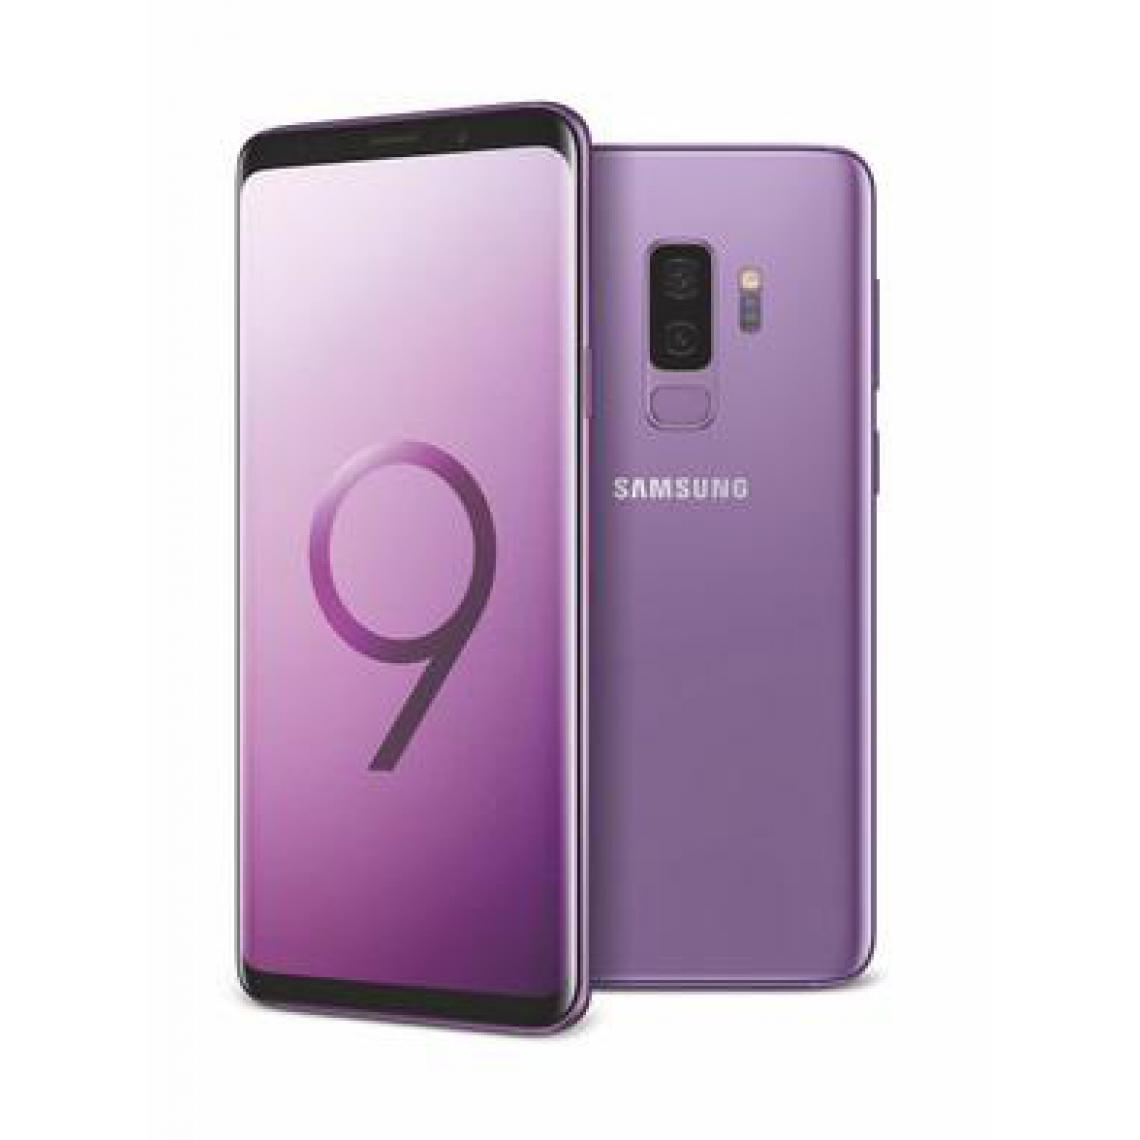 Samsung - Samsung Galaxy S9 Plus 64Go Ultra Violet - Smartphone Android